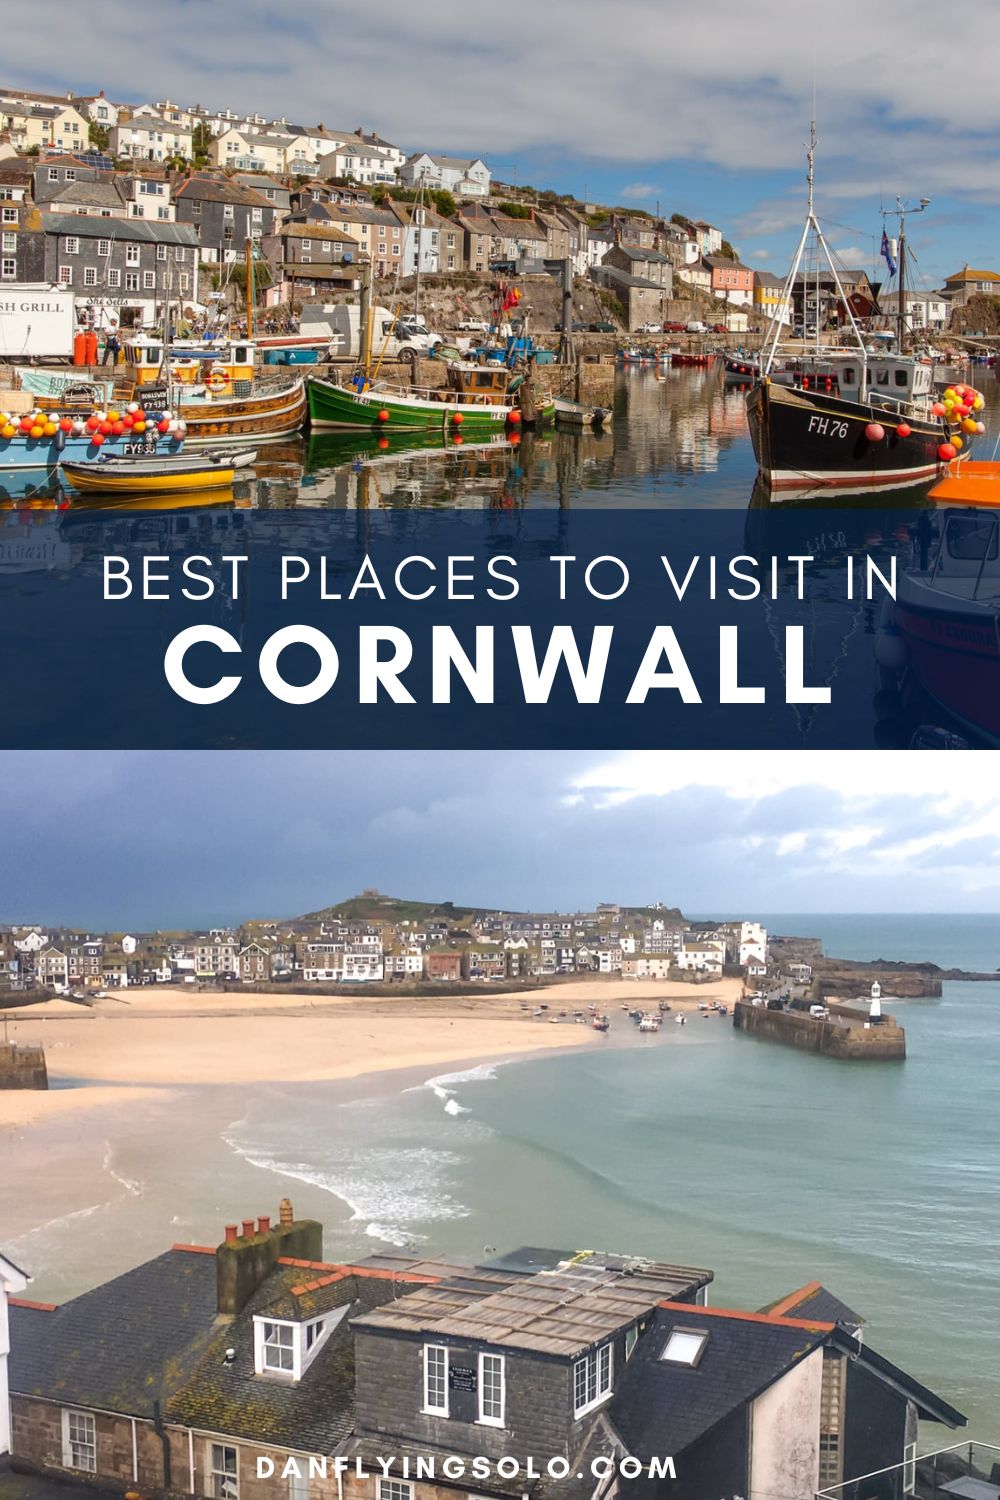 Save this pin of the best places to visit in Cornwall. This guide covers the most famous Cornwall attractions, prettiest villages, and awesome coastal stops.